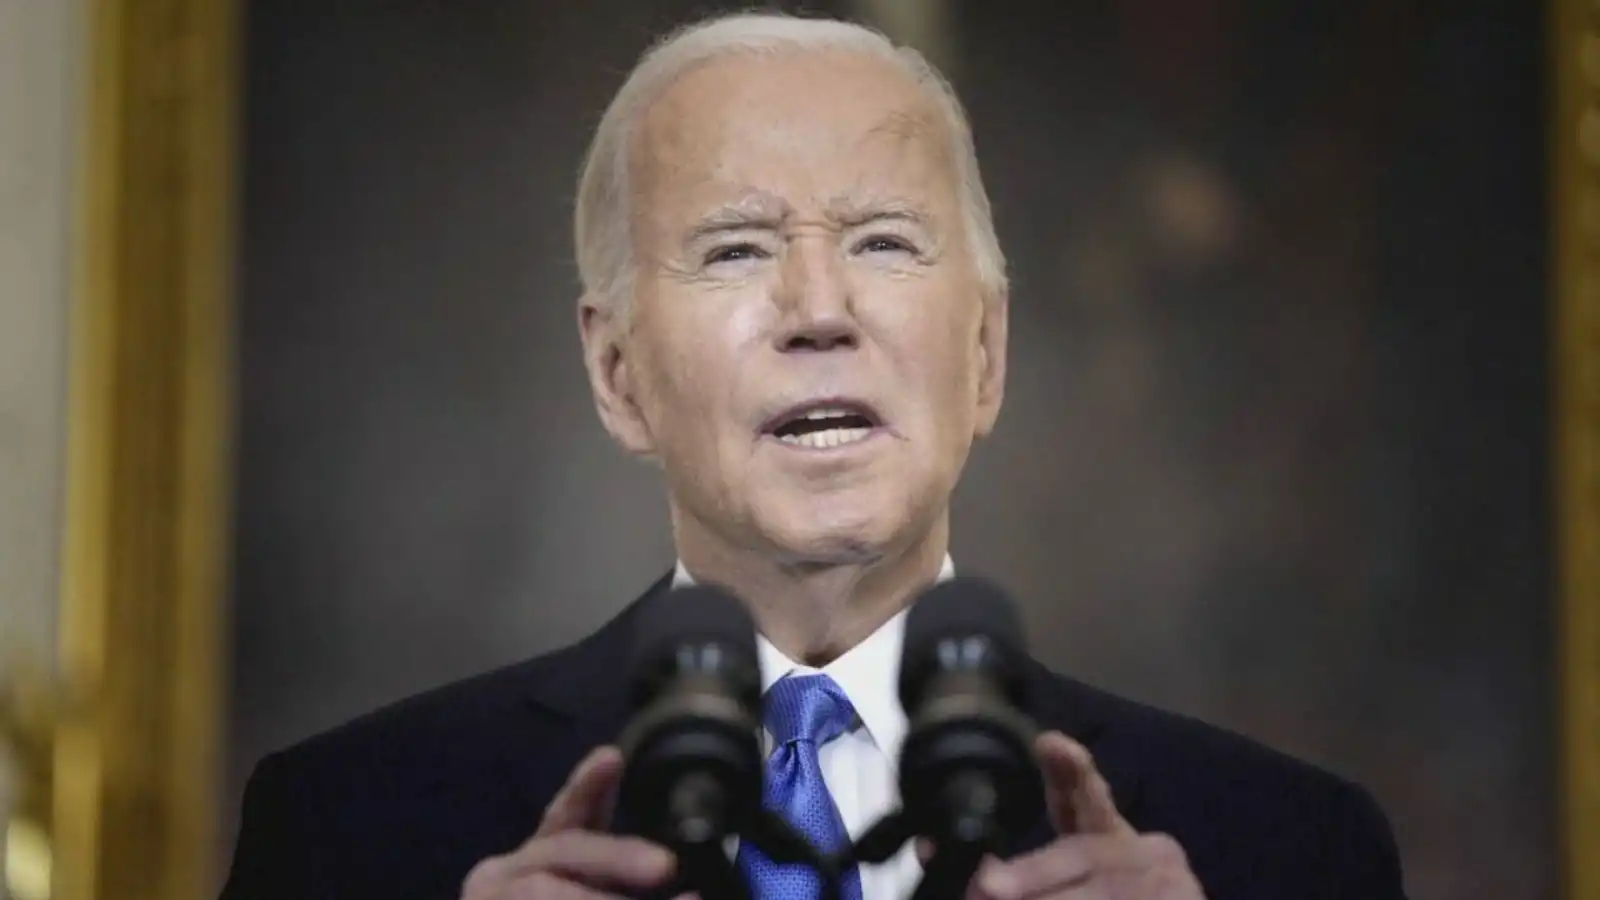 President Joe Biden delivers remarks on the Middle East: Watch Live